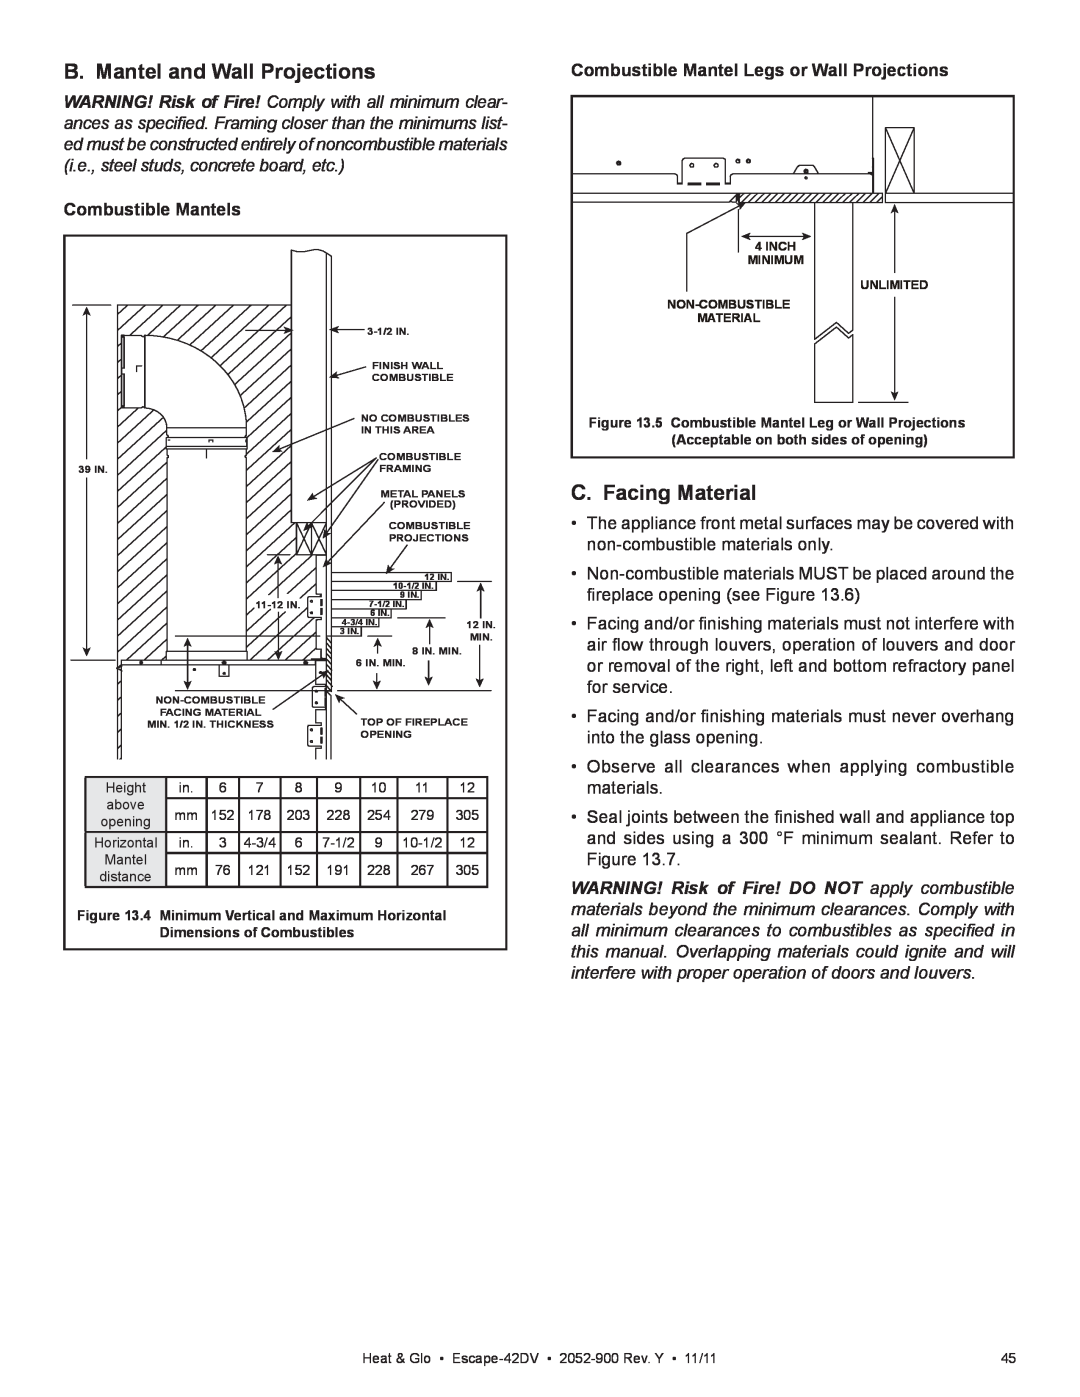 Heat & Glo LifeStyle Escape-42DVLP owner manual B. Mantel and Wall Projections, C. Facing Material, Combustible Mantels 